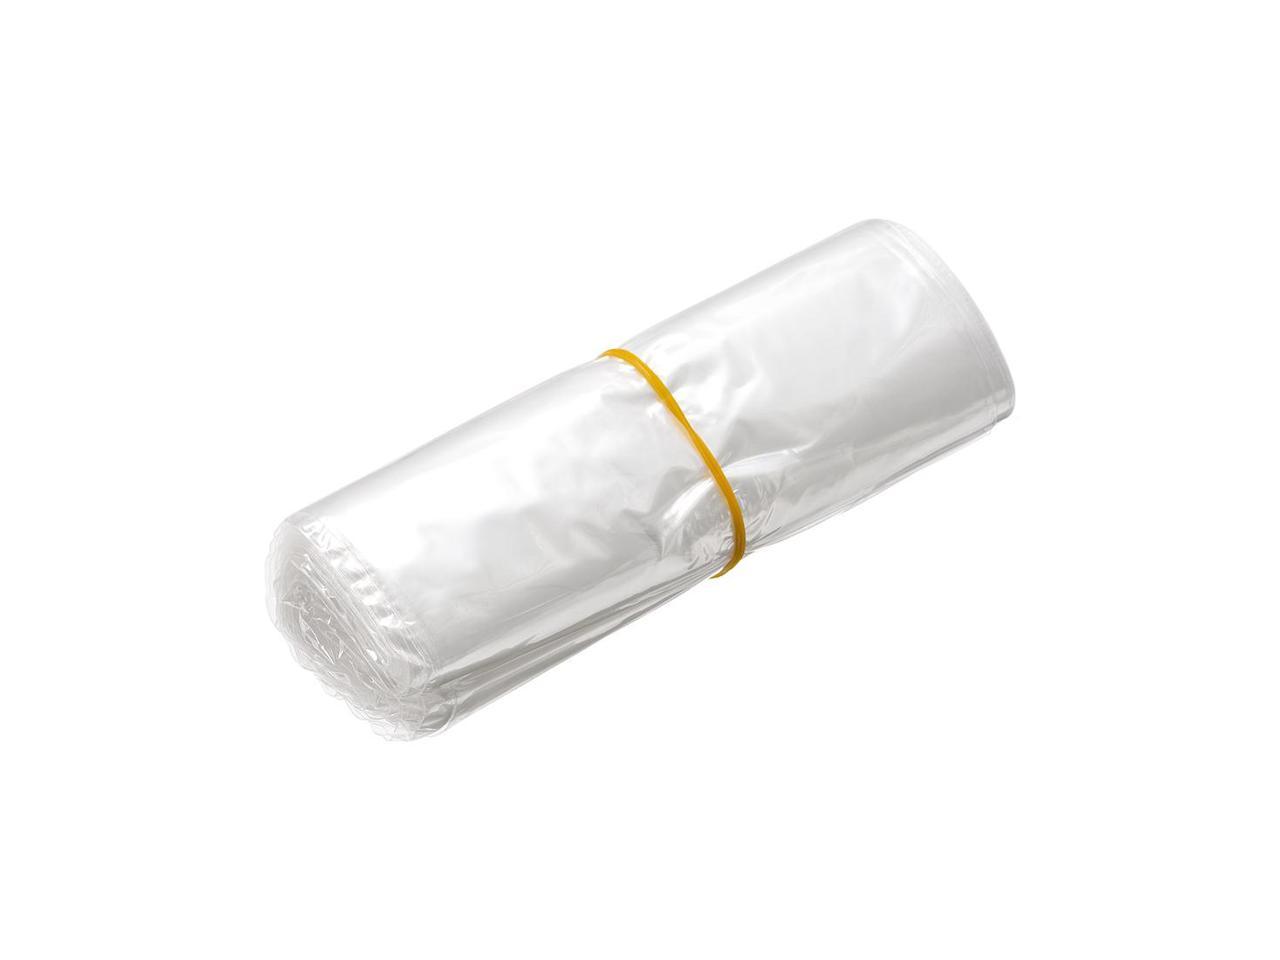 PVC Heat Shrink Wrap Bags uxcell Shrink Bags 9x6 inch 100pcs Shrinkable Wrapping Packaging Bags Industrial Packaging Sealer Bags